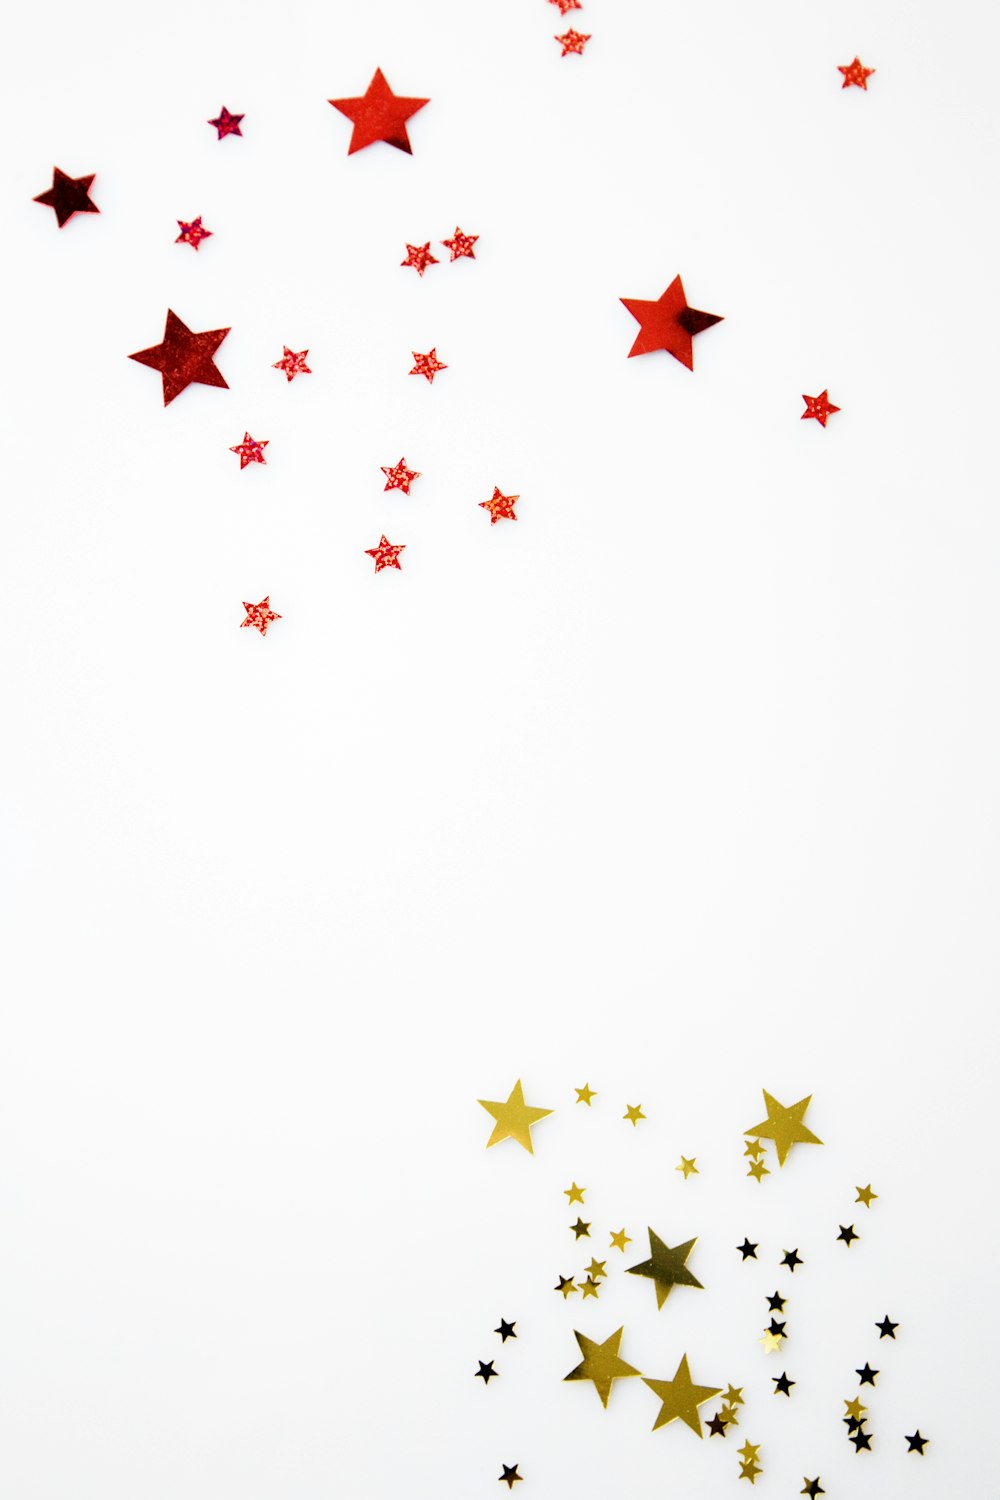 red and yellow star illustration